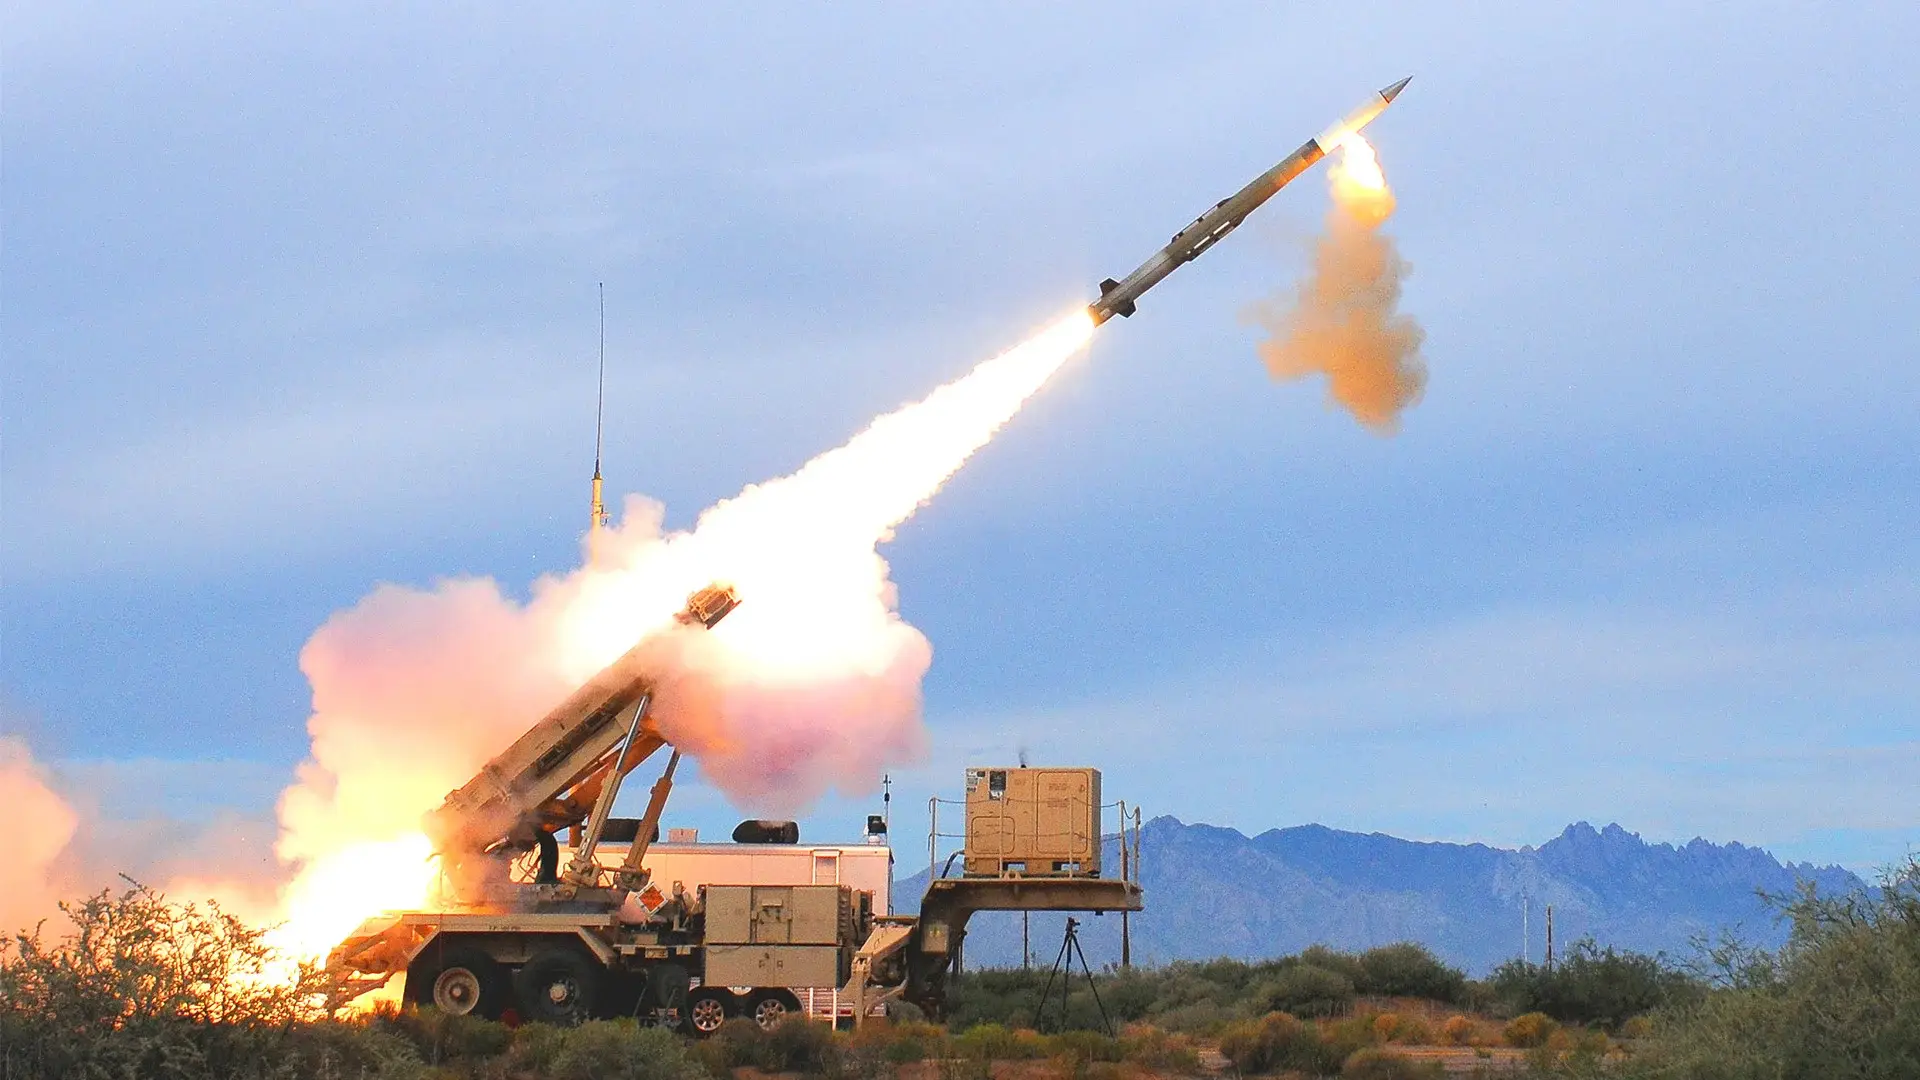 The US may face a shortage of MIM-104 Patriot missile defence systems due to tensions in the Middle East